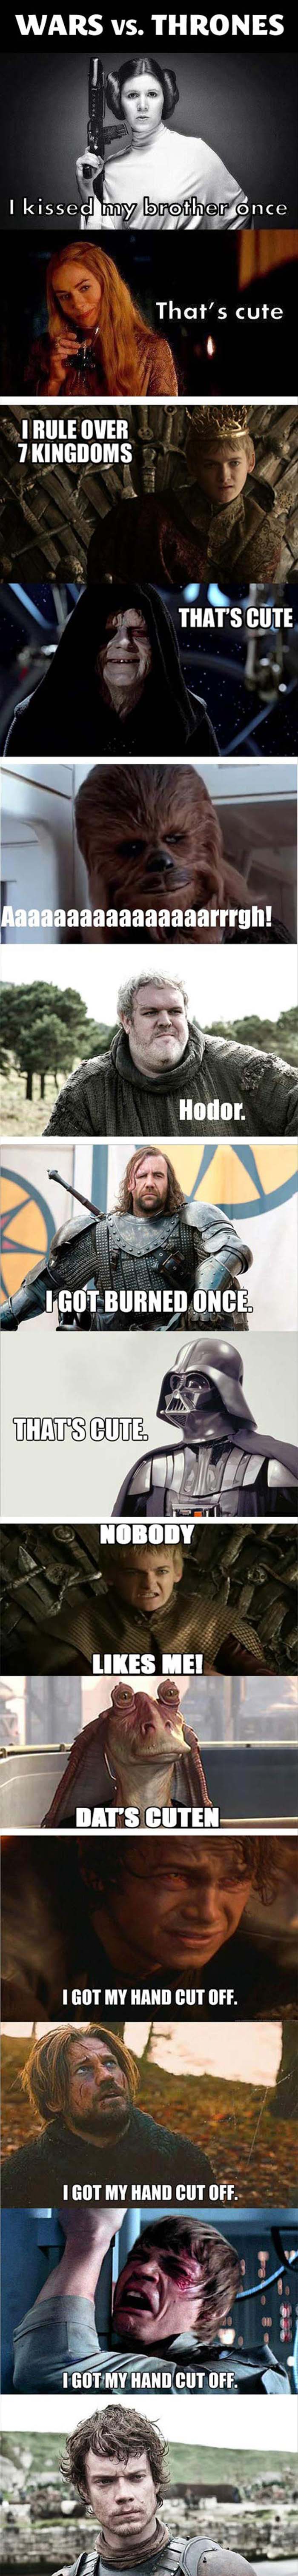 funny-Star-Wars-characters-Game-Thrones